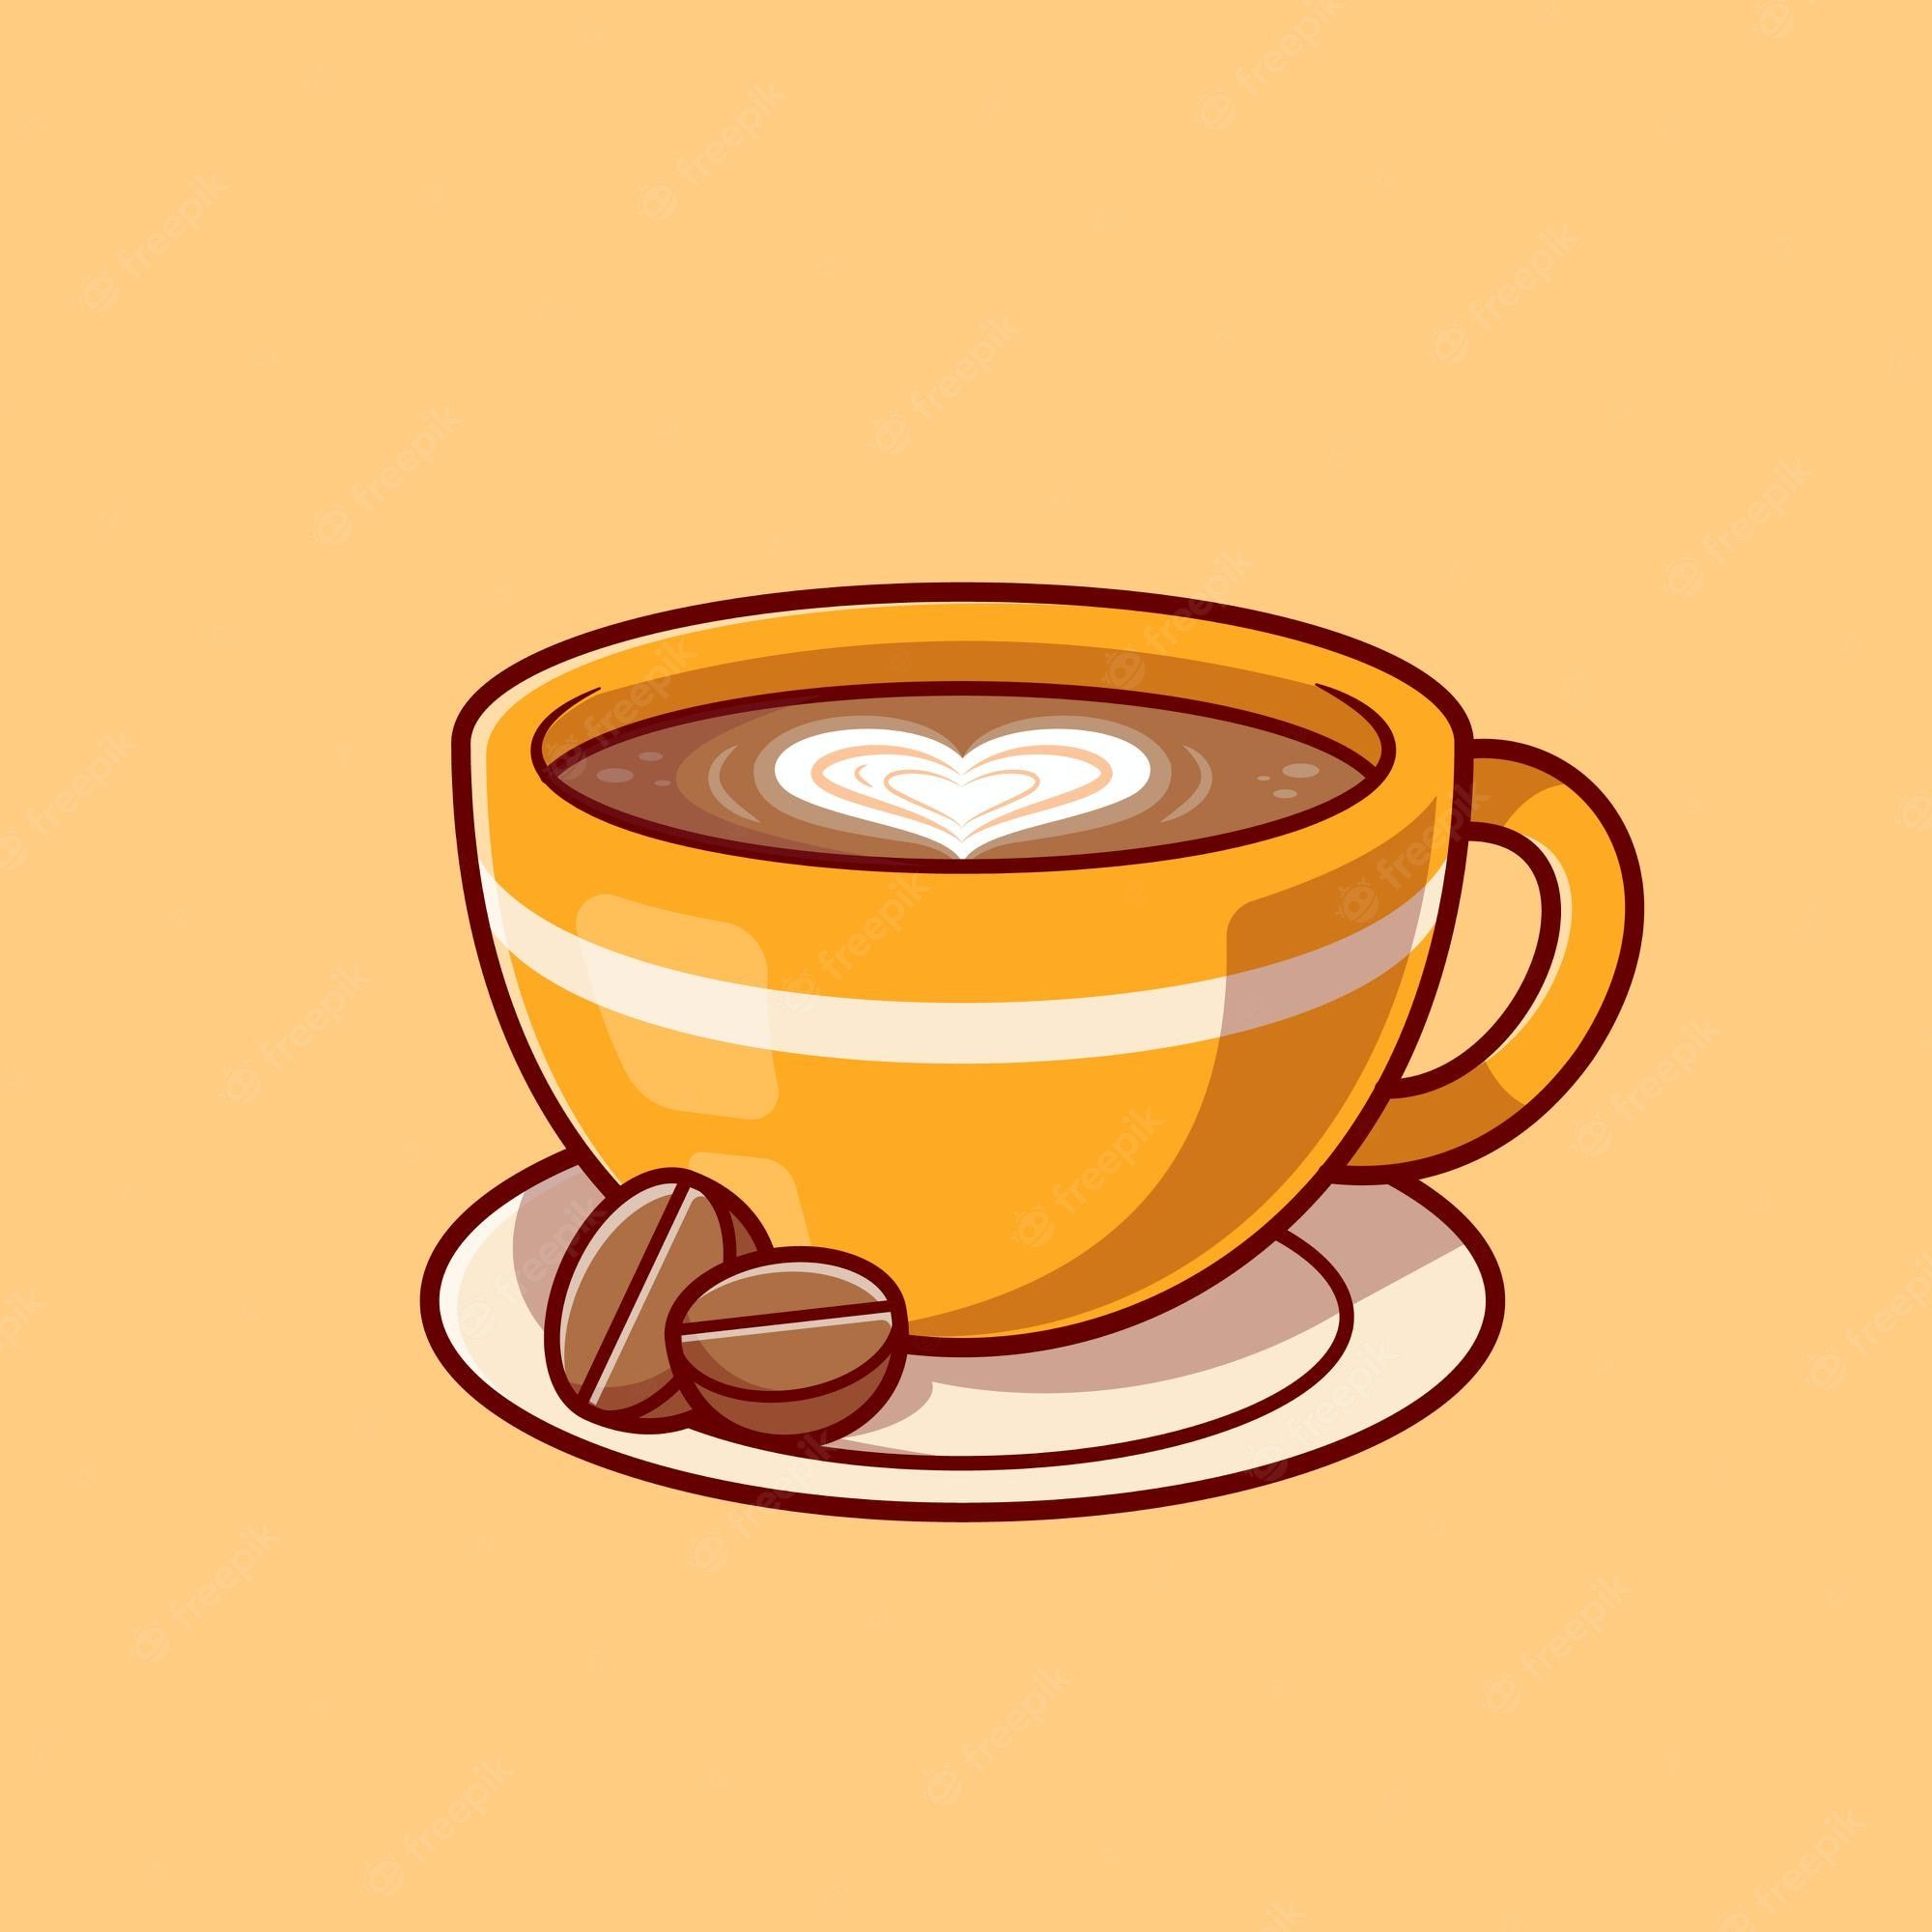 Coffee cup with a heart and beans - Coffee